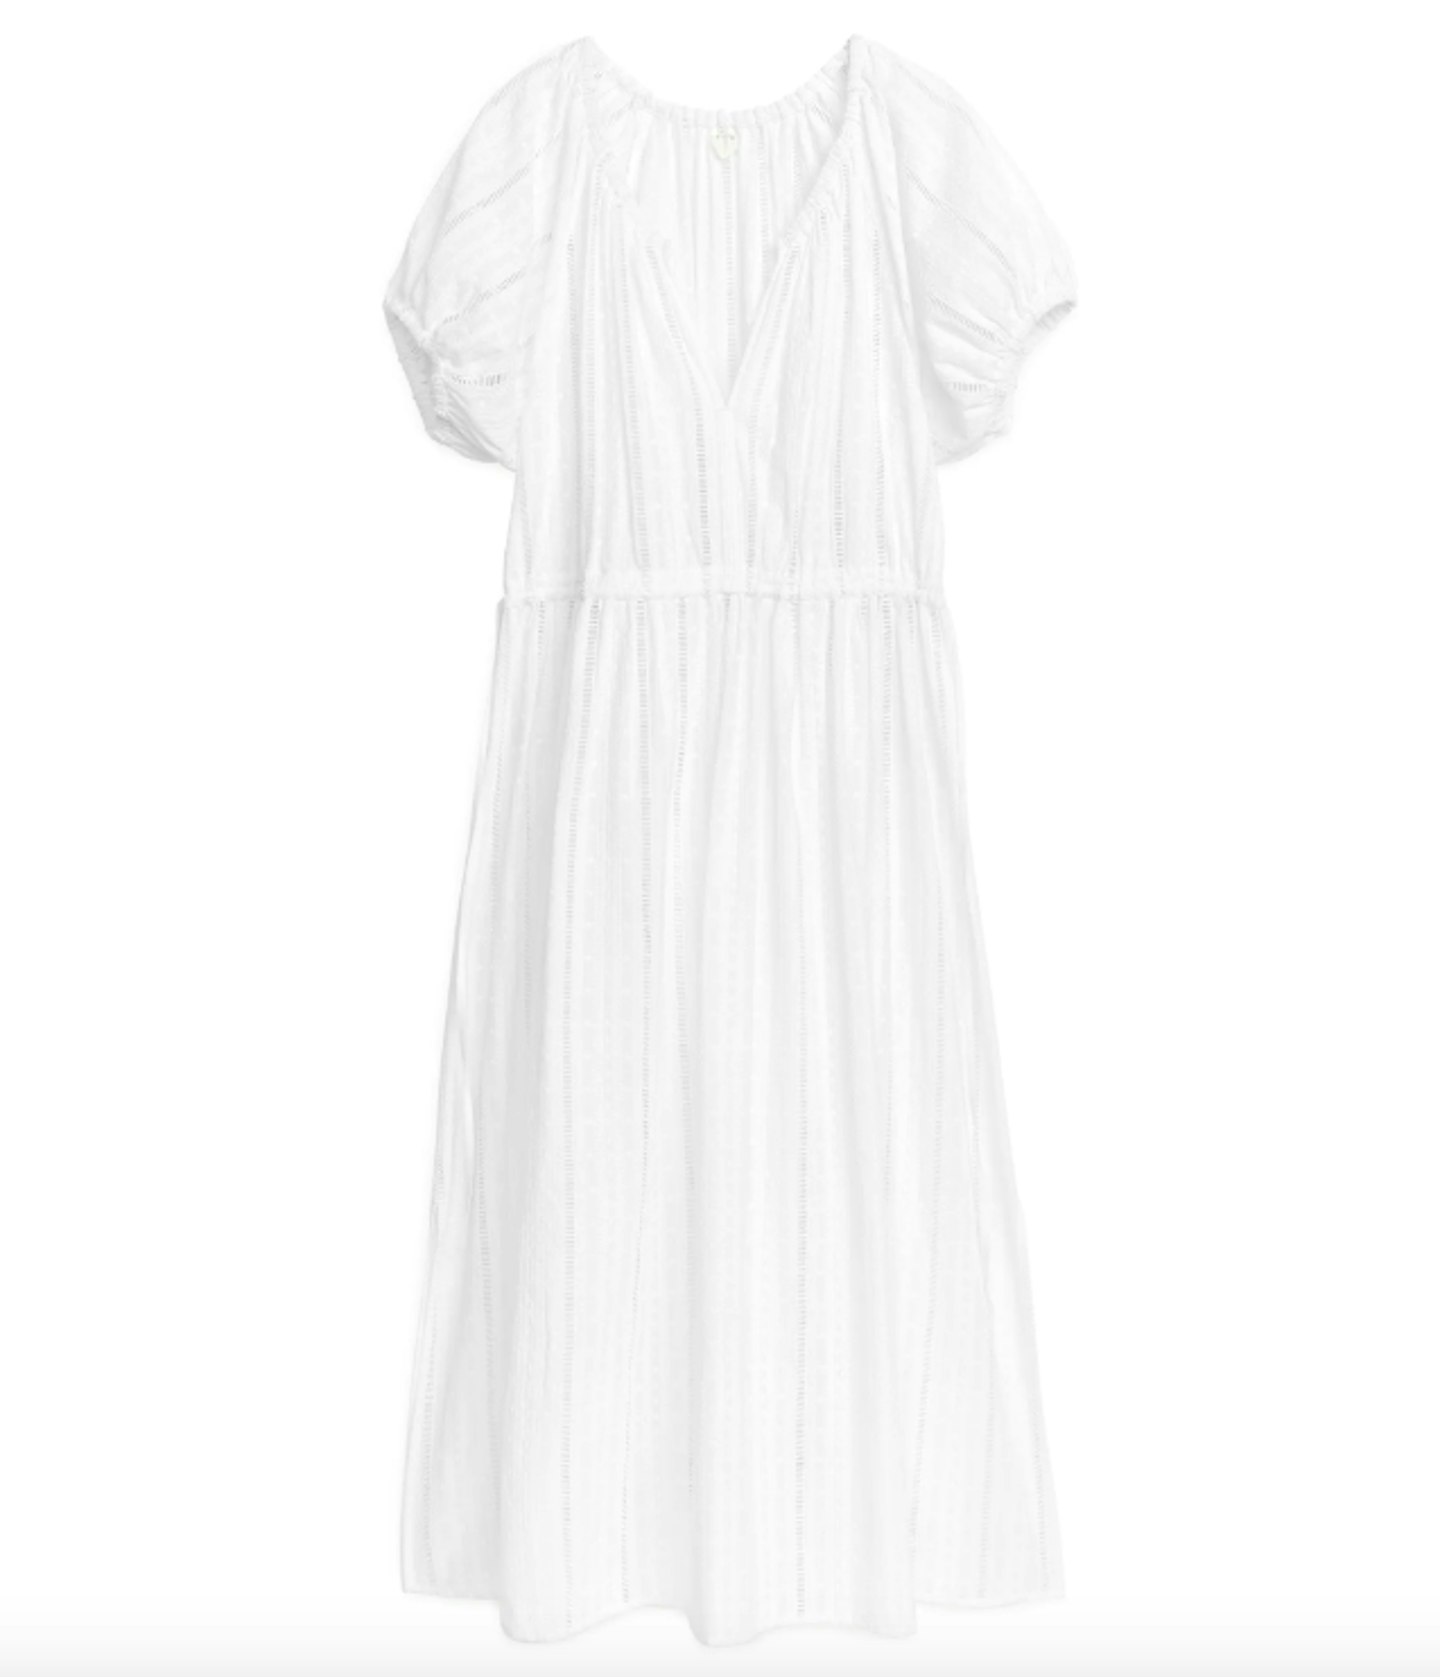 Sienna Miller's Wimbledon White Dress Is Still Available To Buy